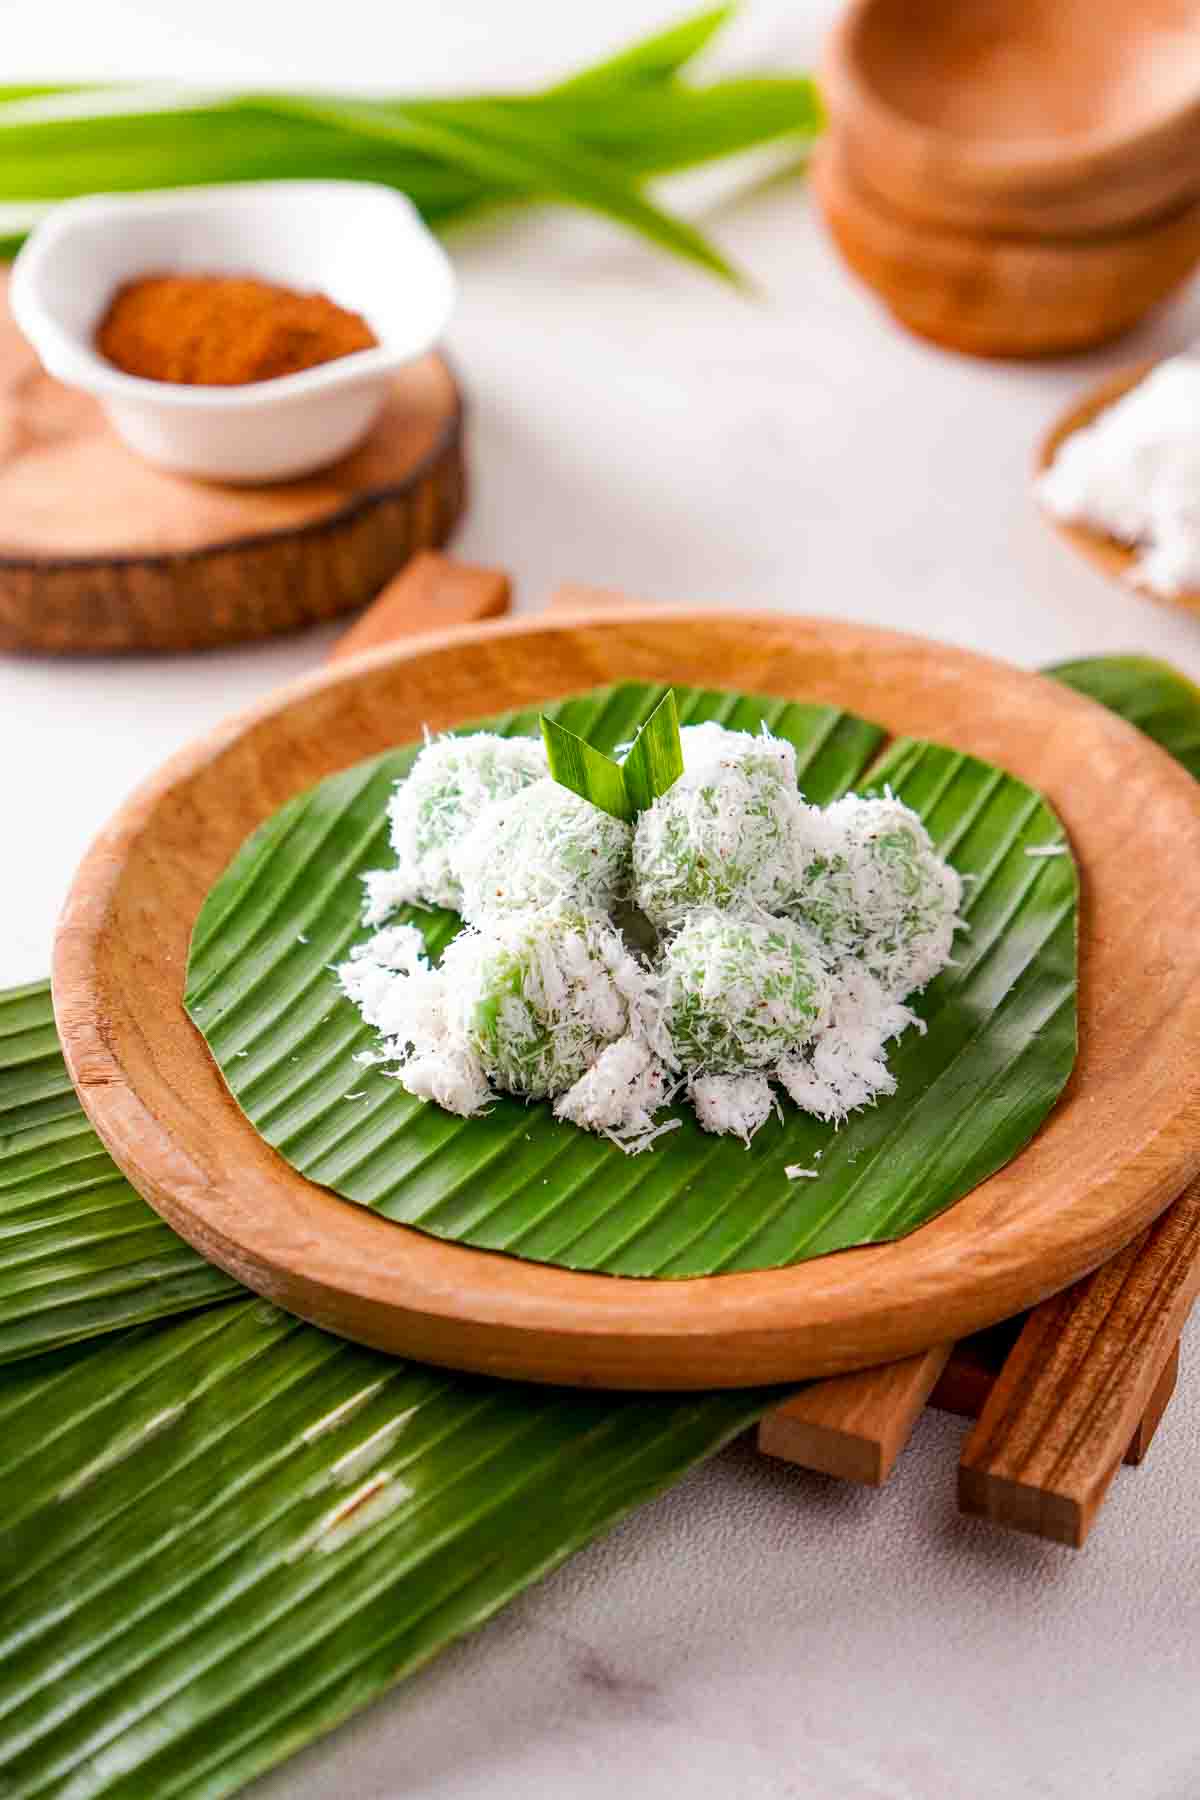 Indonesian klepon on a leaf. Palm sugar, in a white bowl, can be seen in the background.